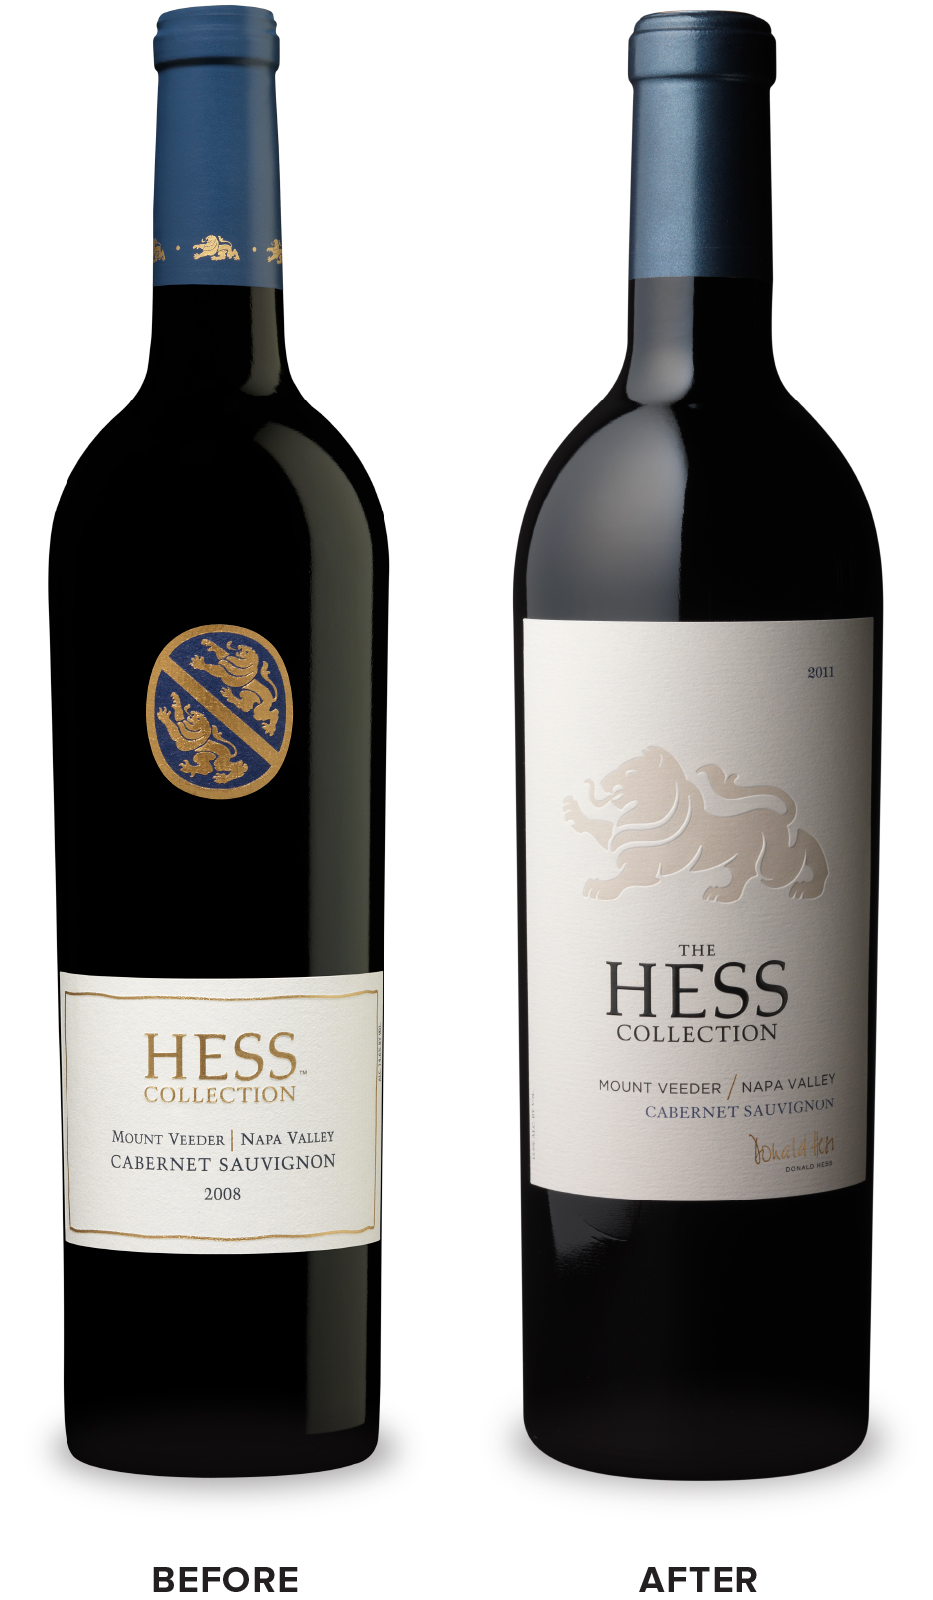 The Hess Collection Mount Veeder Cabernet Sauvignon Wine Packaging Before Redesign on Left & After on Right